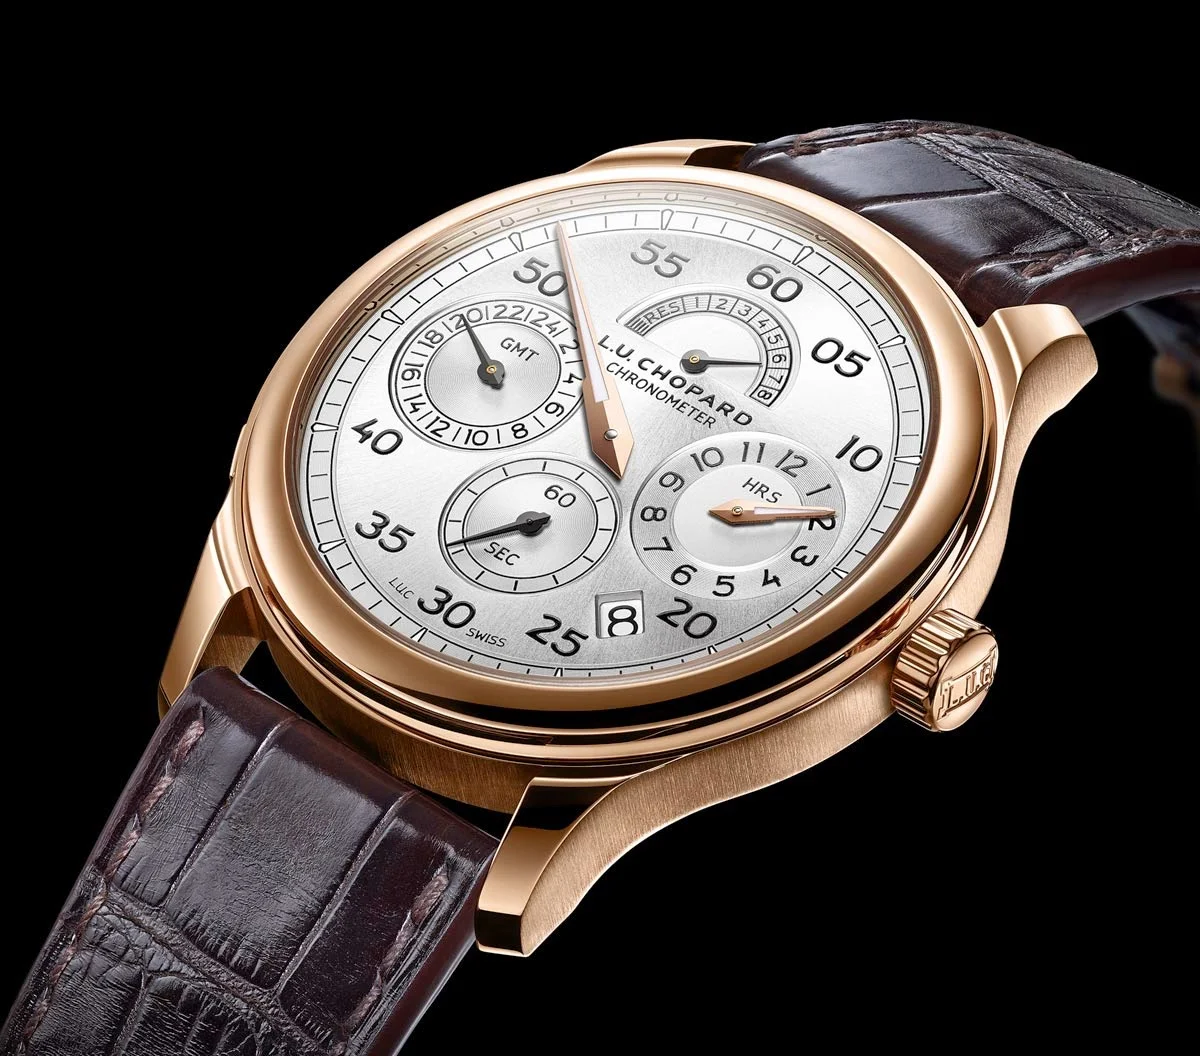 Chopard - L.U.C Regulator | Time and Watches | The watch blog